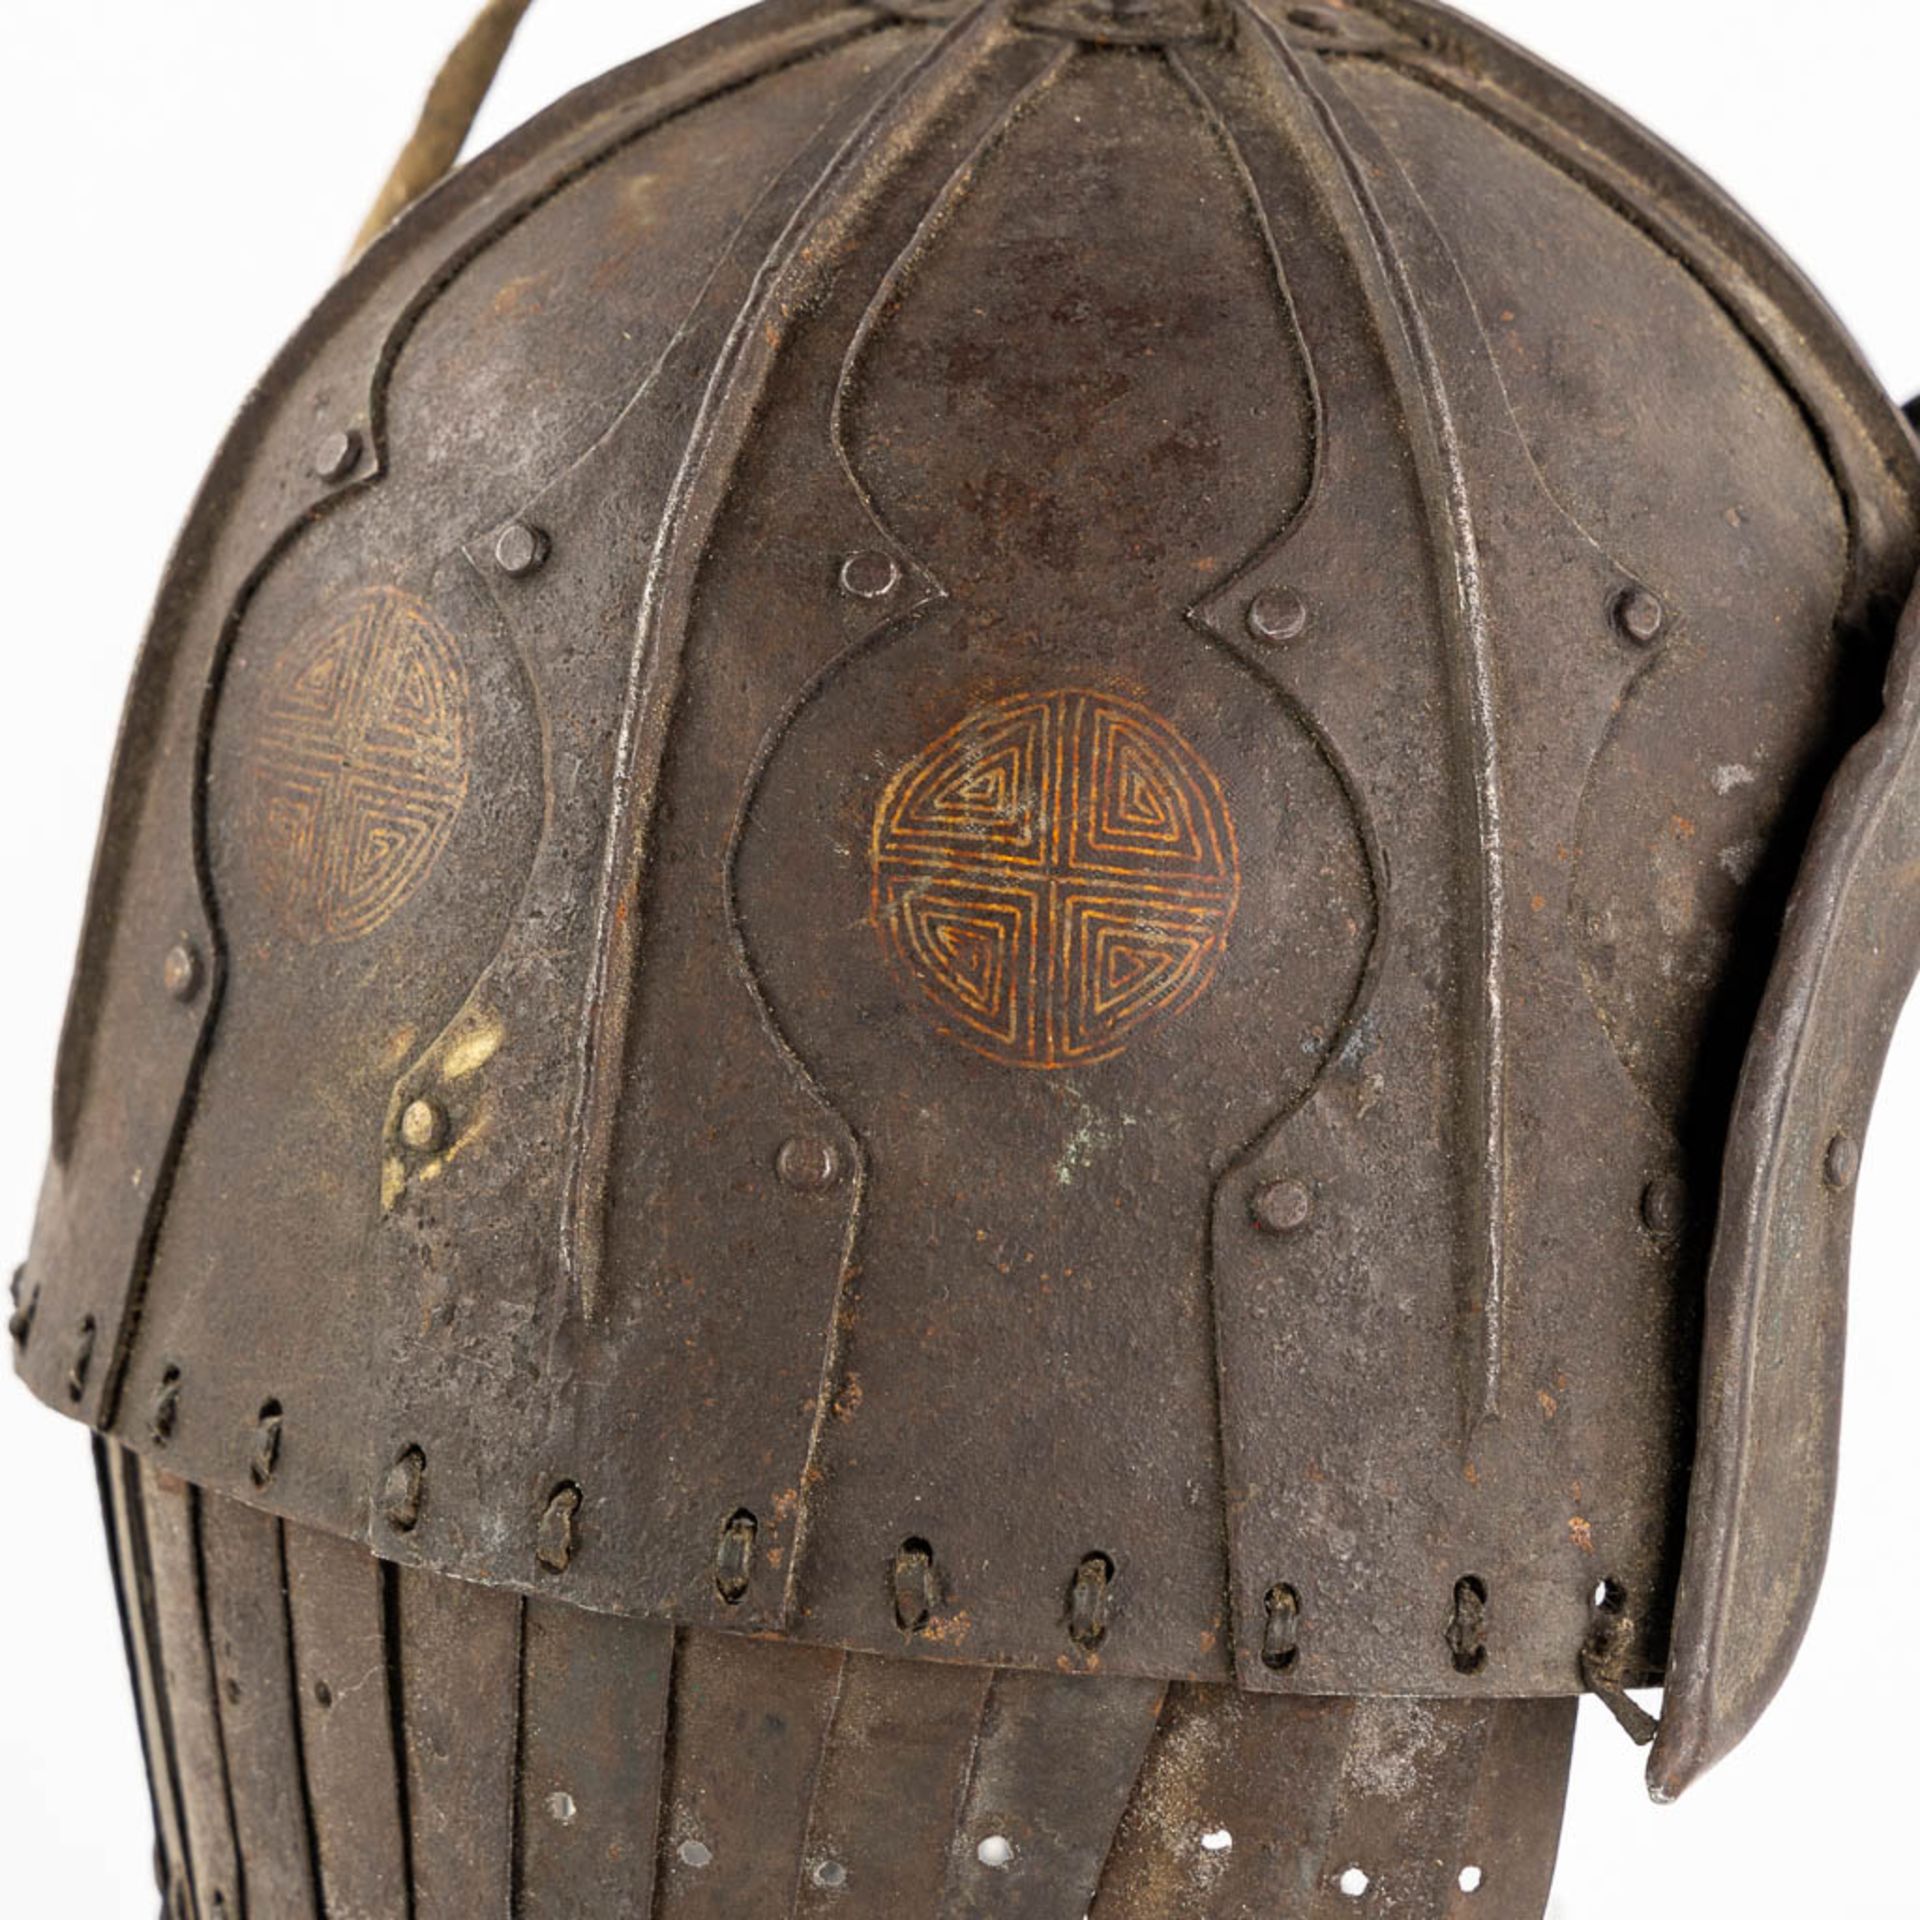 A Tibetan military helmet, iron and leather. 18th/19th C. (L:20 x W:24 x H:42 cm) - Image 7 of 11